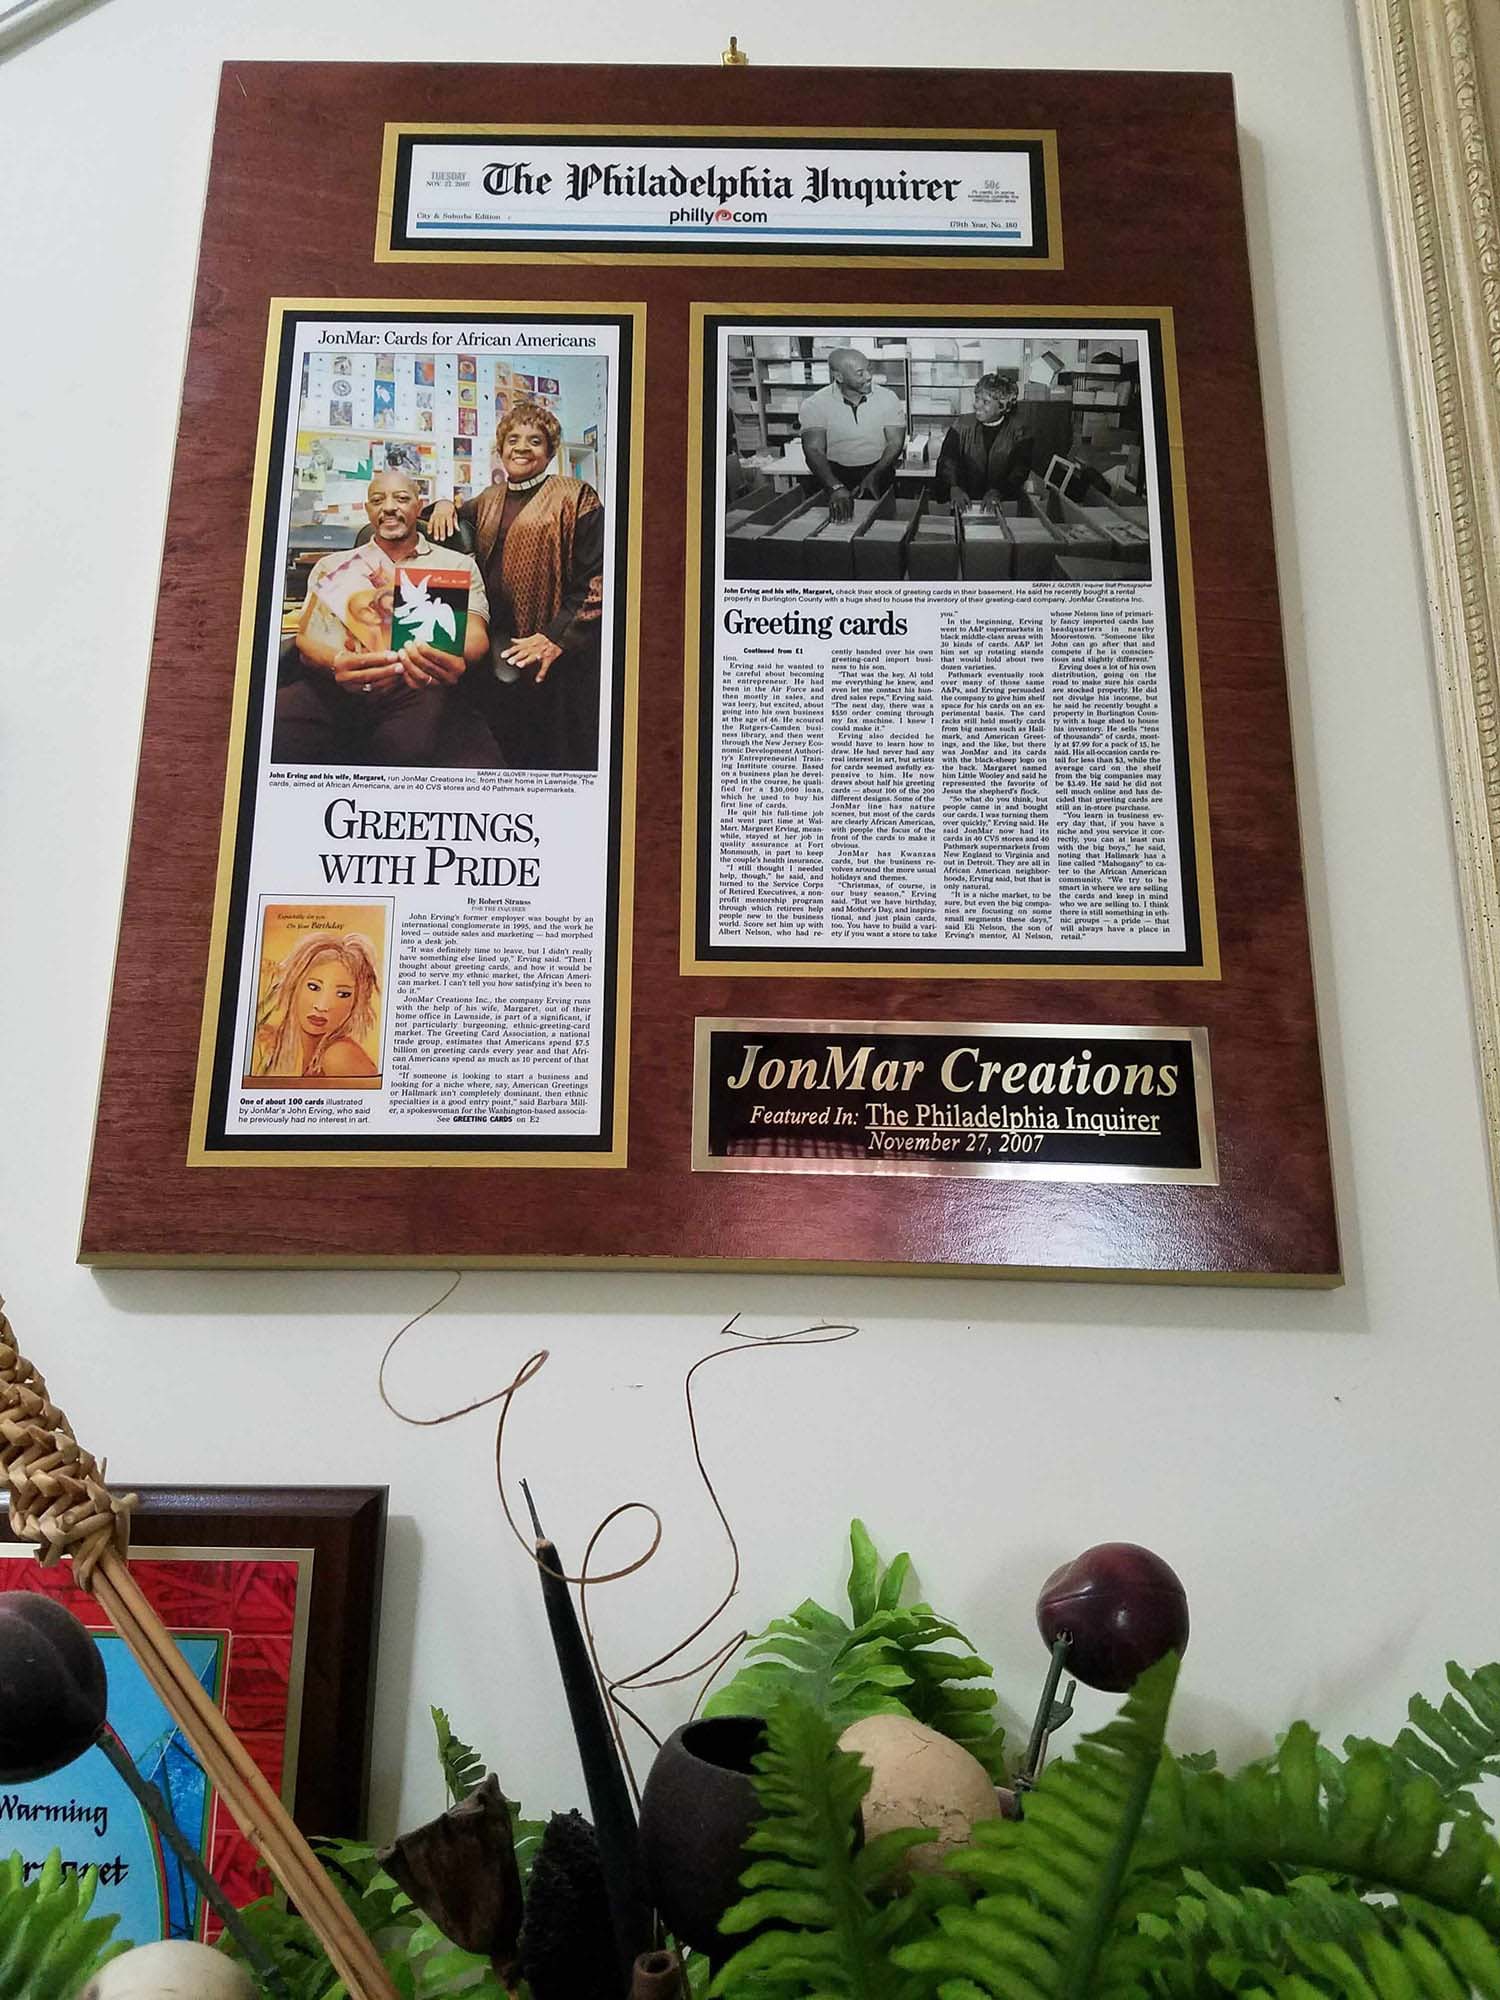 JonMar Creations Inc has been featured in nearly every news publication and or magazine in the Mid Atlantic region of the USA